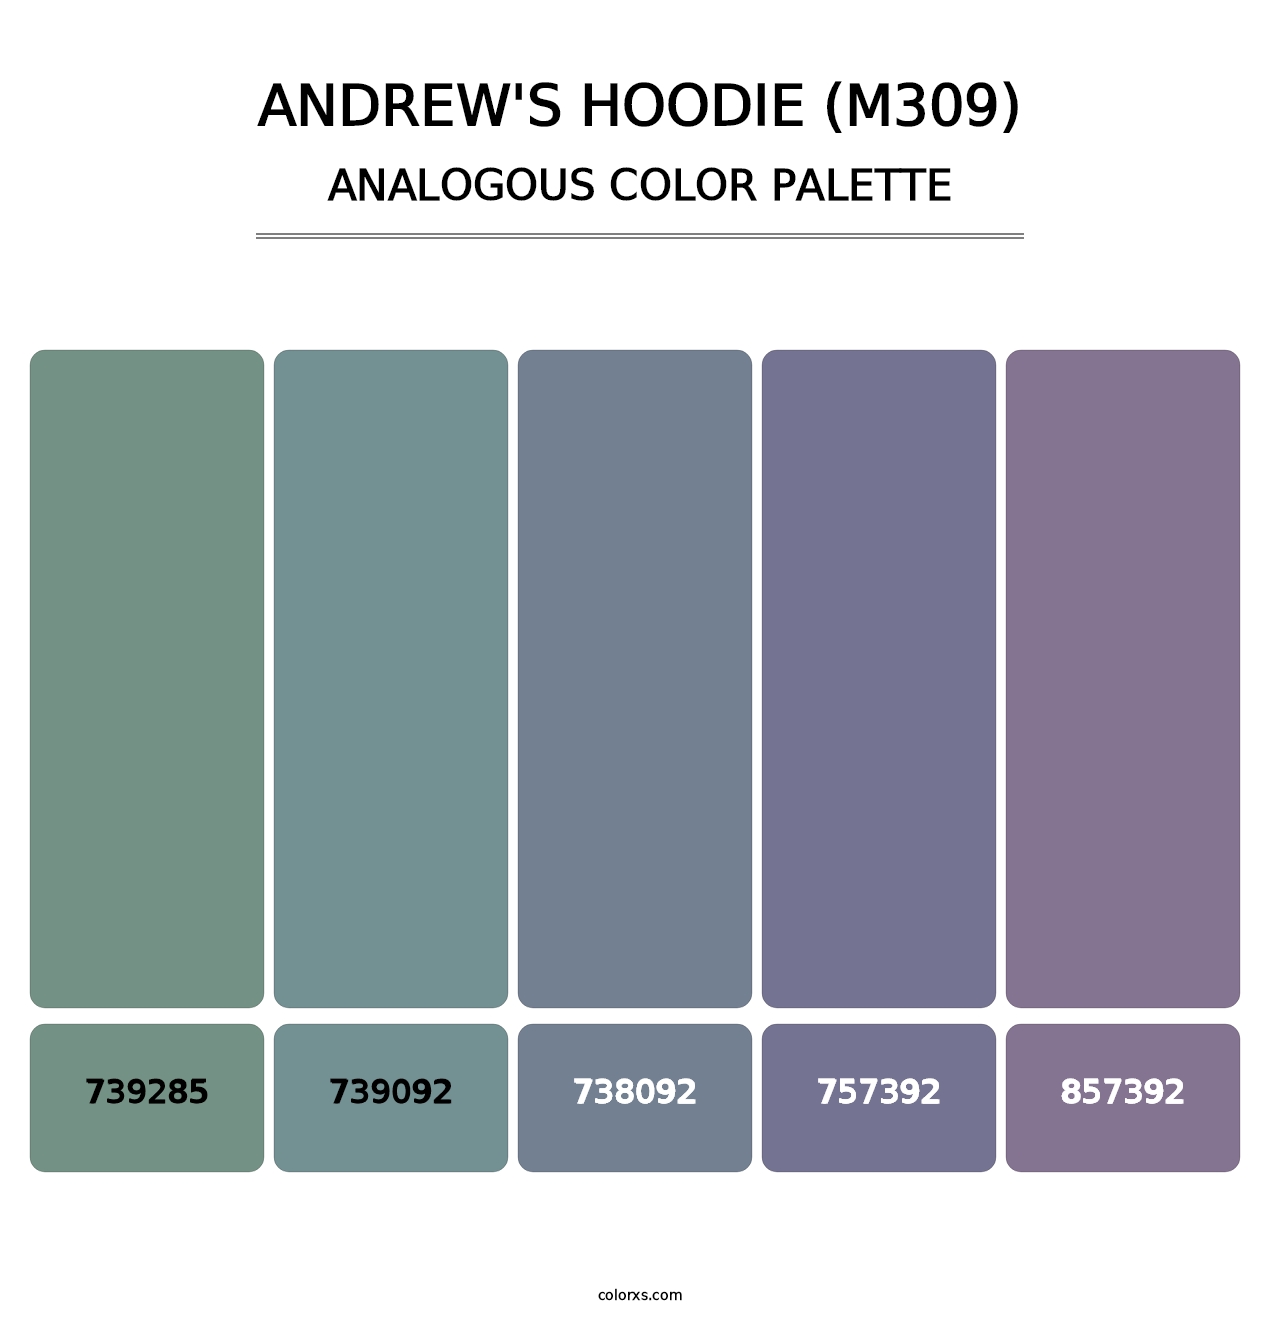 Andrew's Hoodie (M309) - Analogous Color Palette